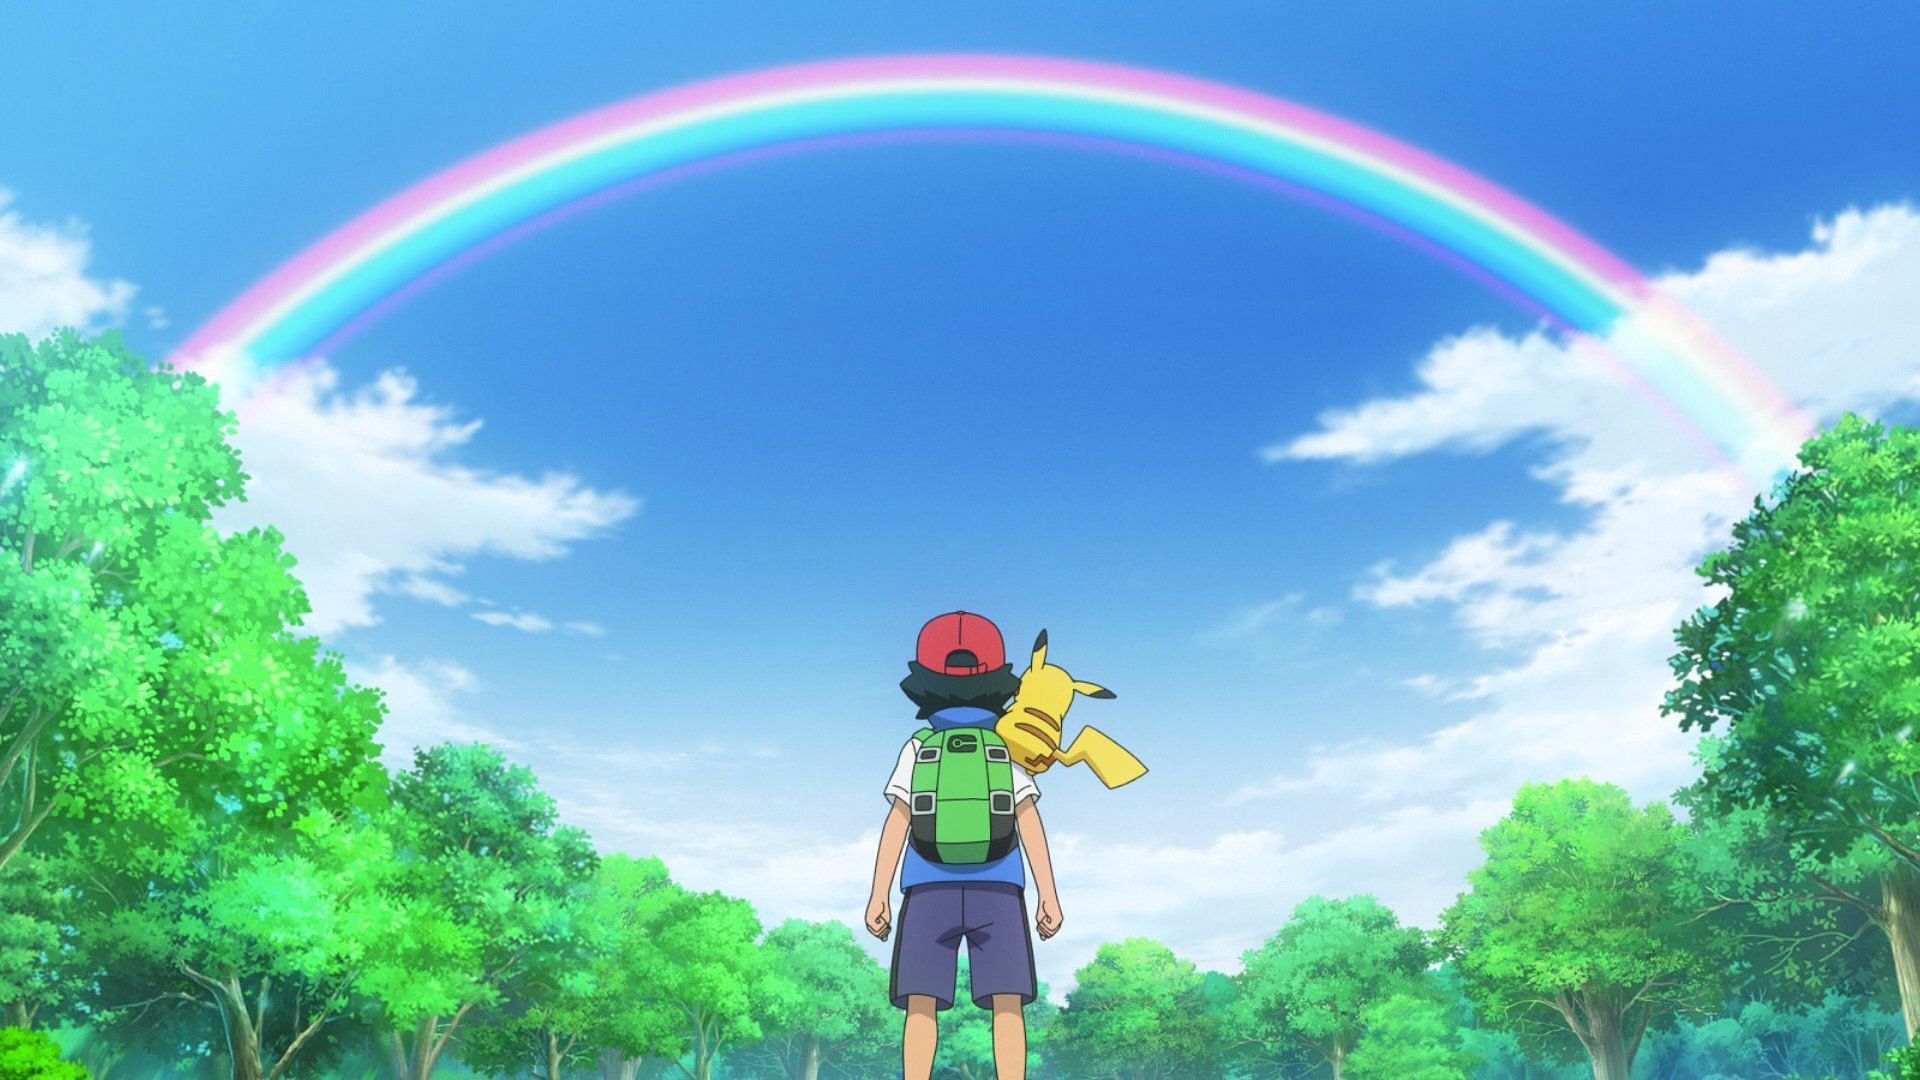 New Pokémon series with 2 main characters to premiere in April 2023